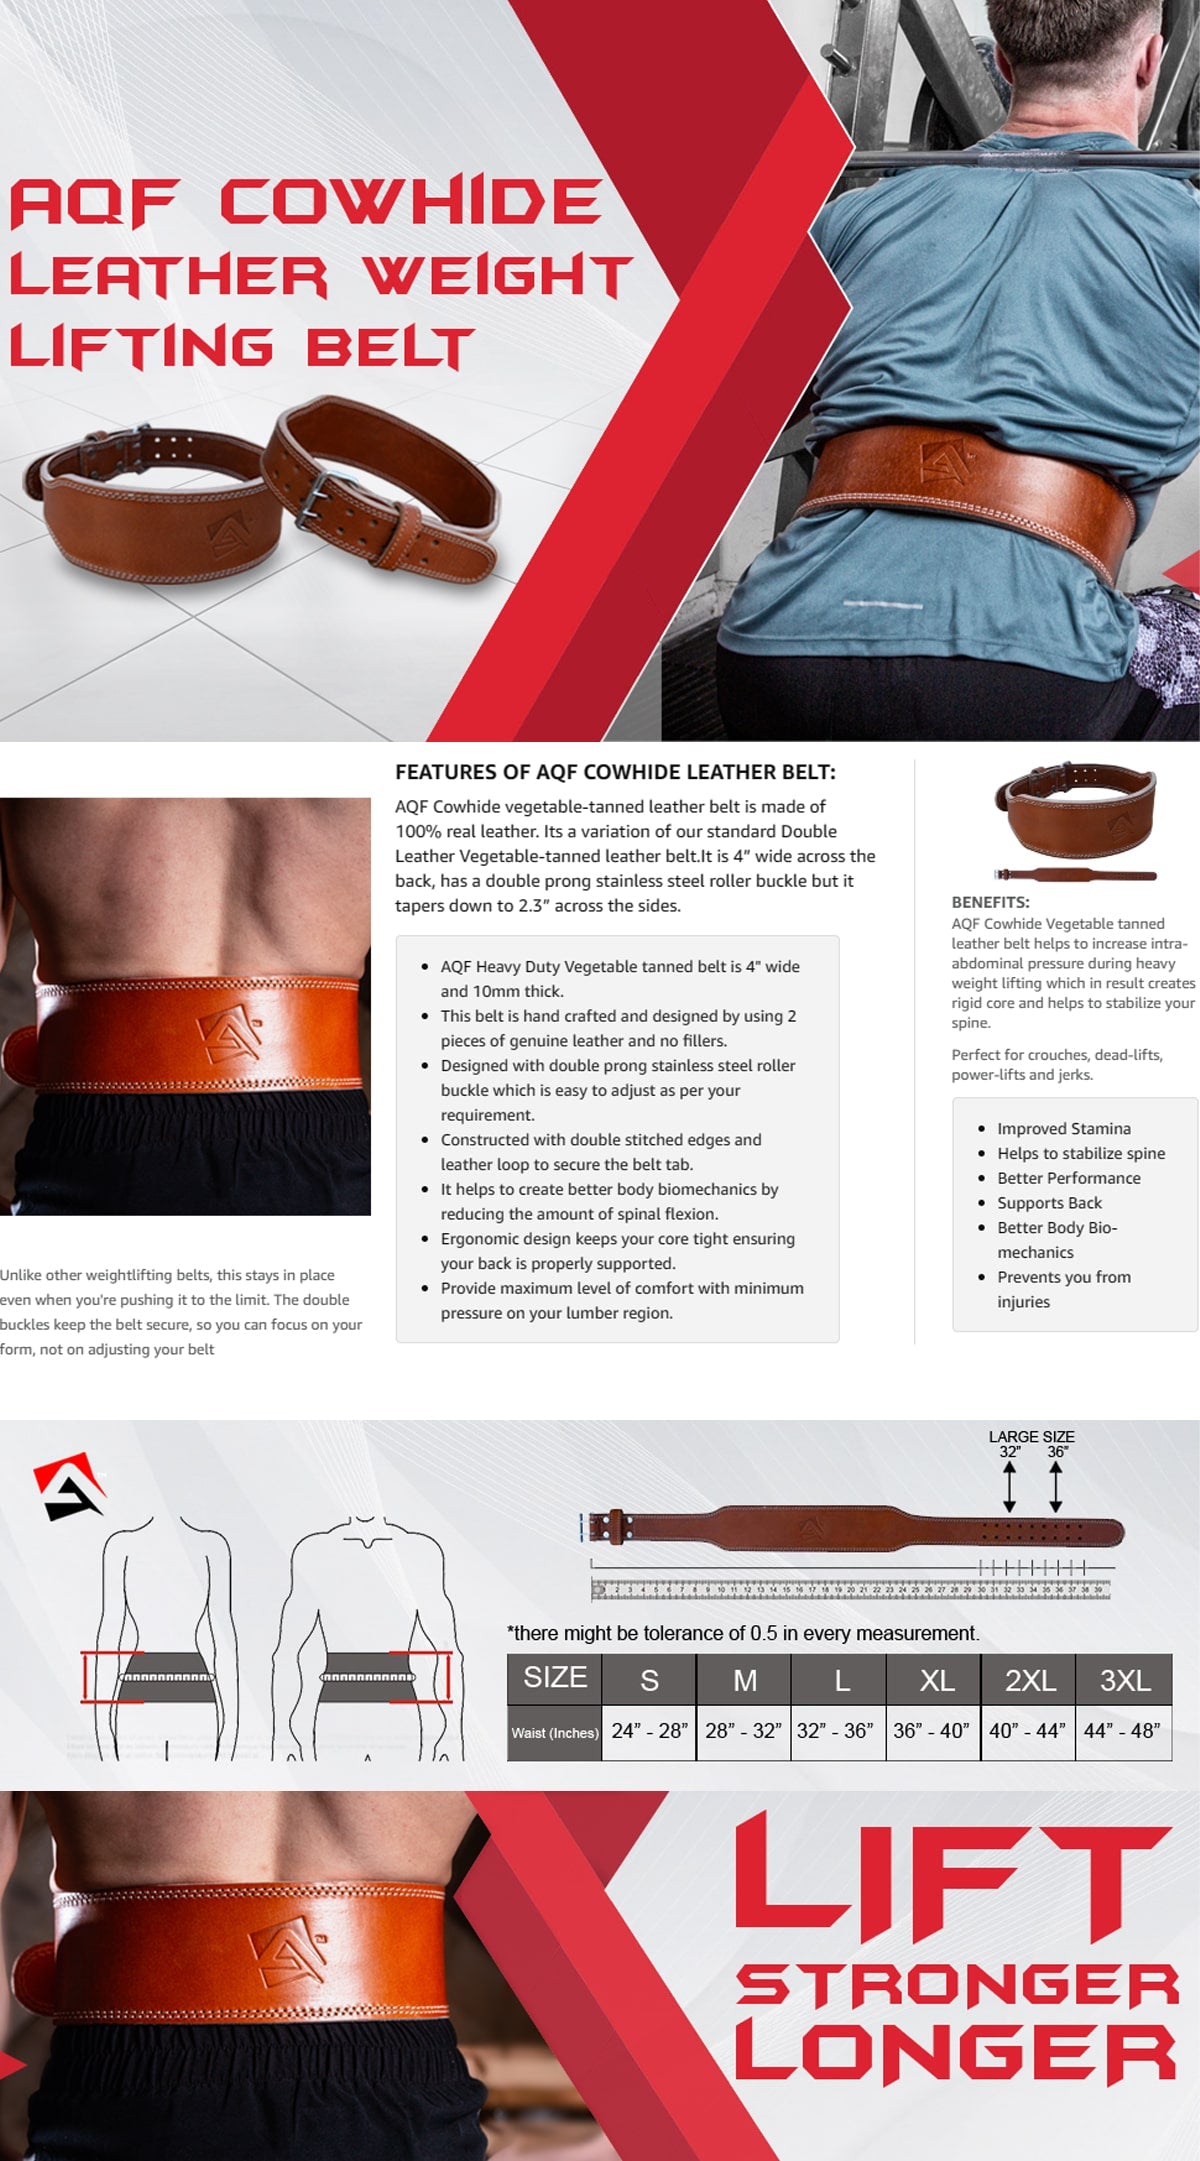 Size and Features of AQF COWHIDE leather belt